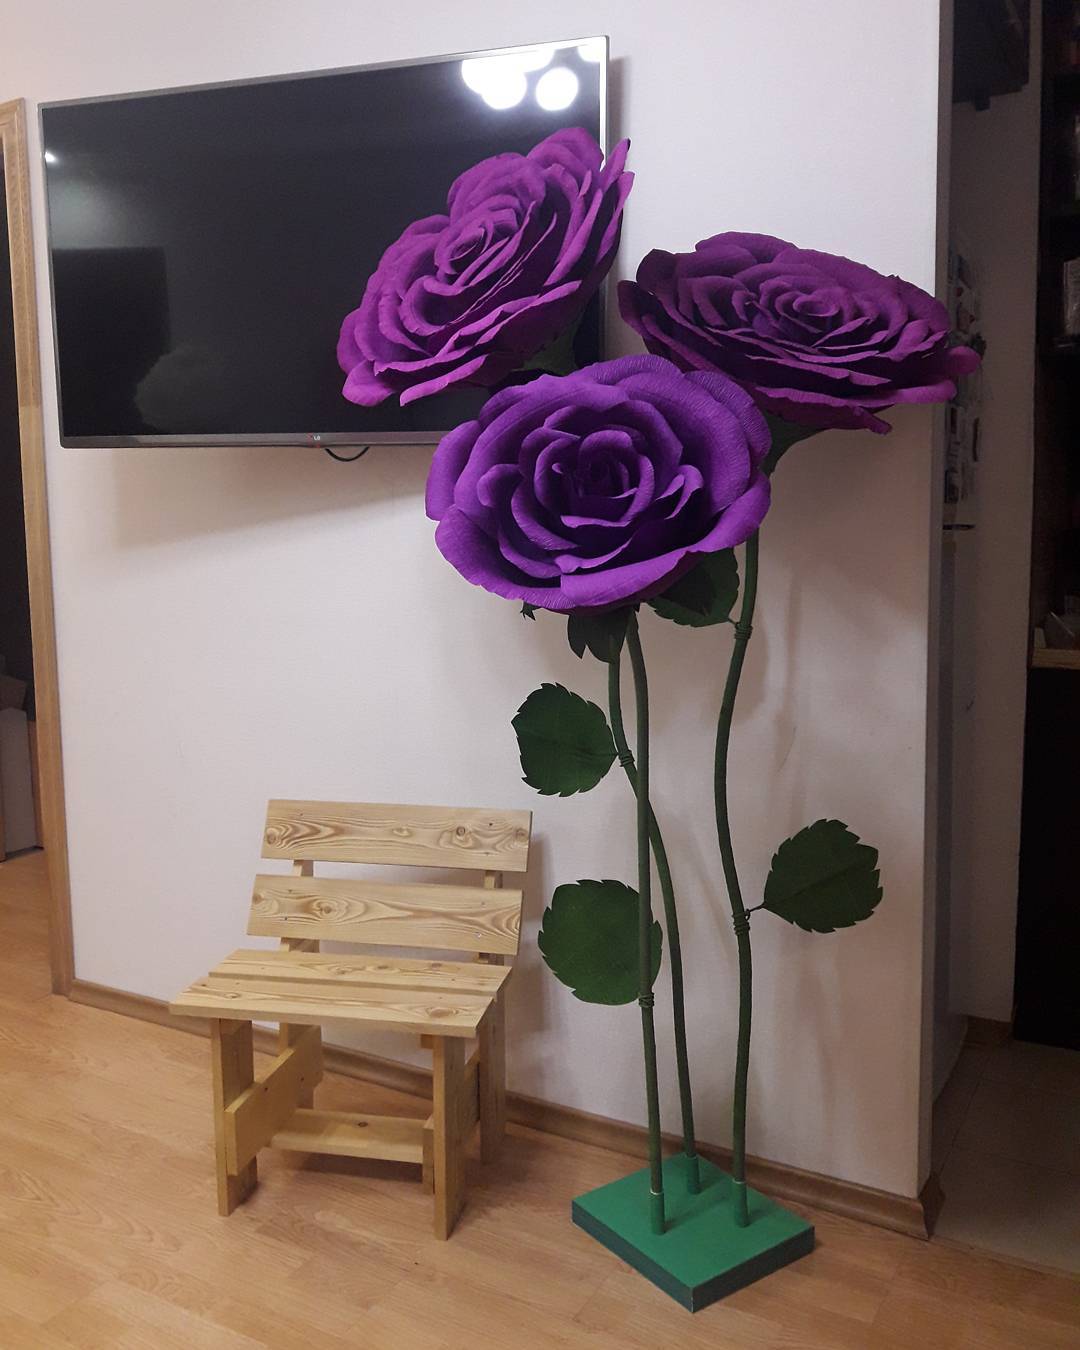 Wholesale Giant Flower Decoration To Decorate Your Environment